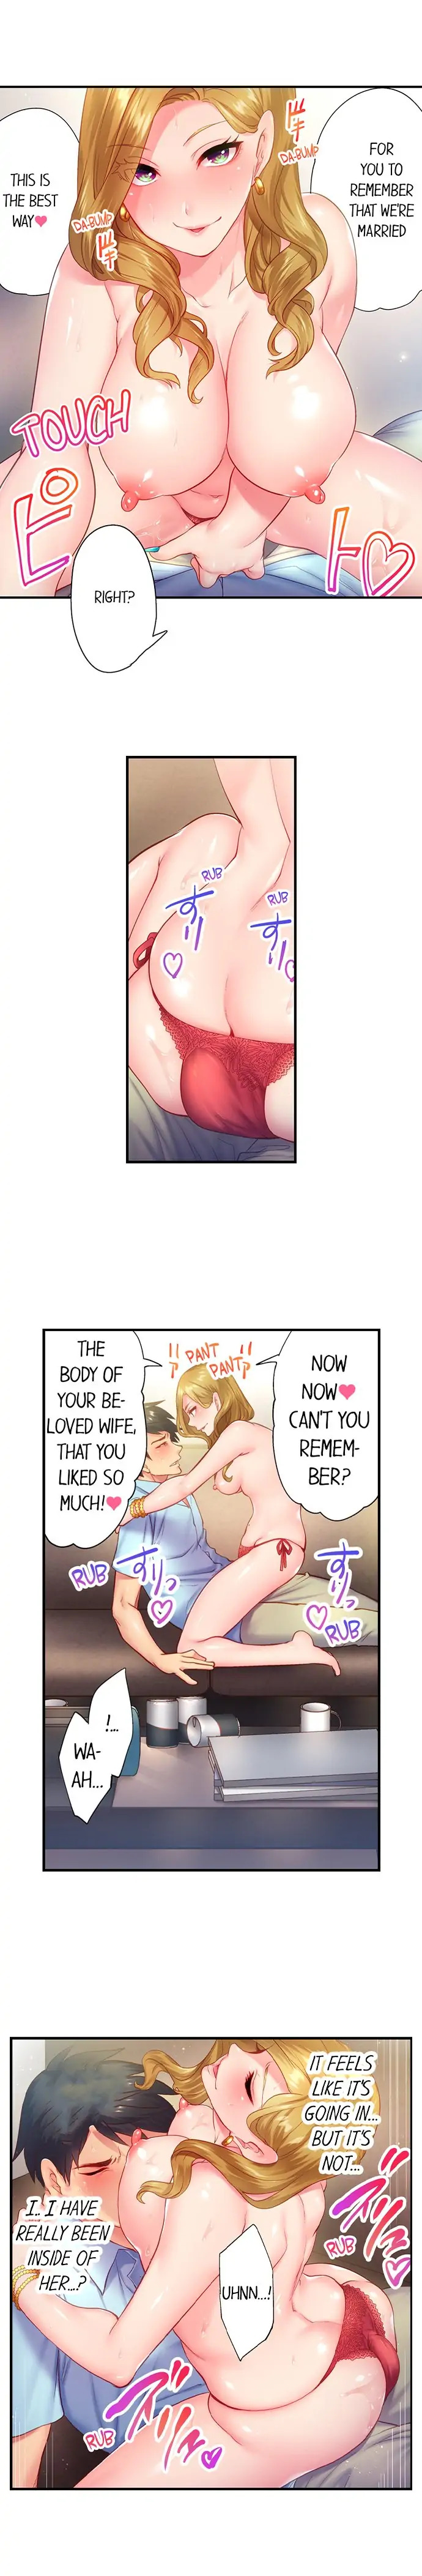 First Time With My Wife (Again) - Chapter 3 Page 8